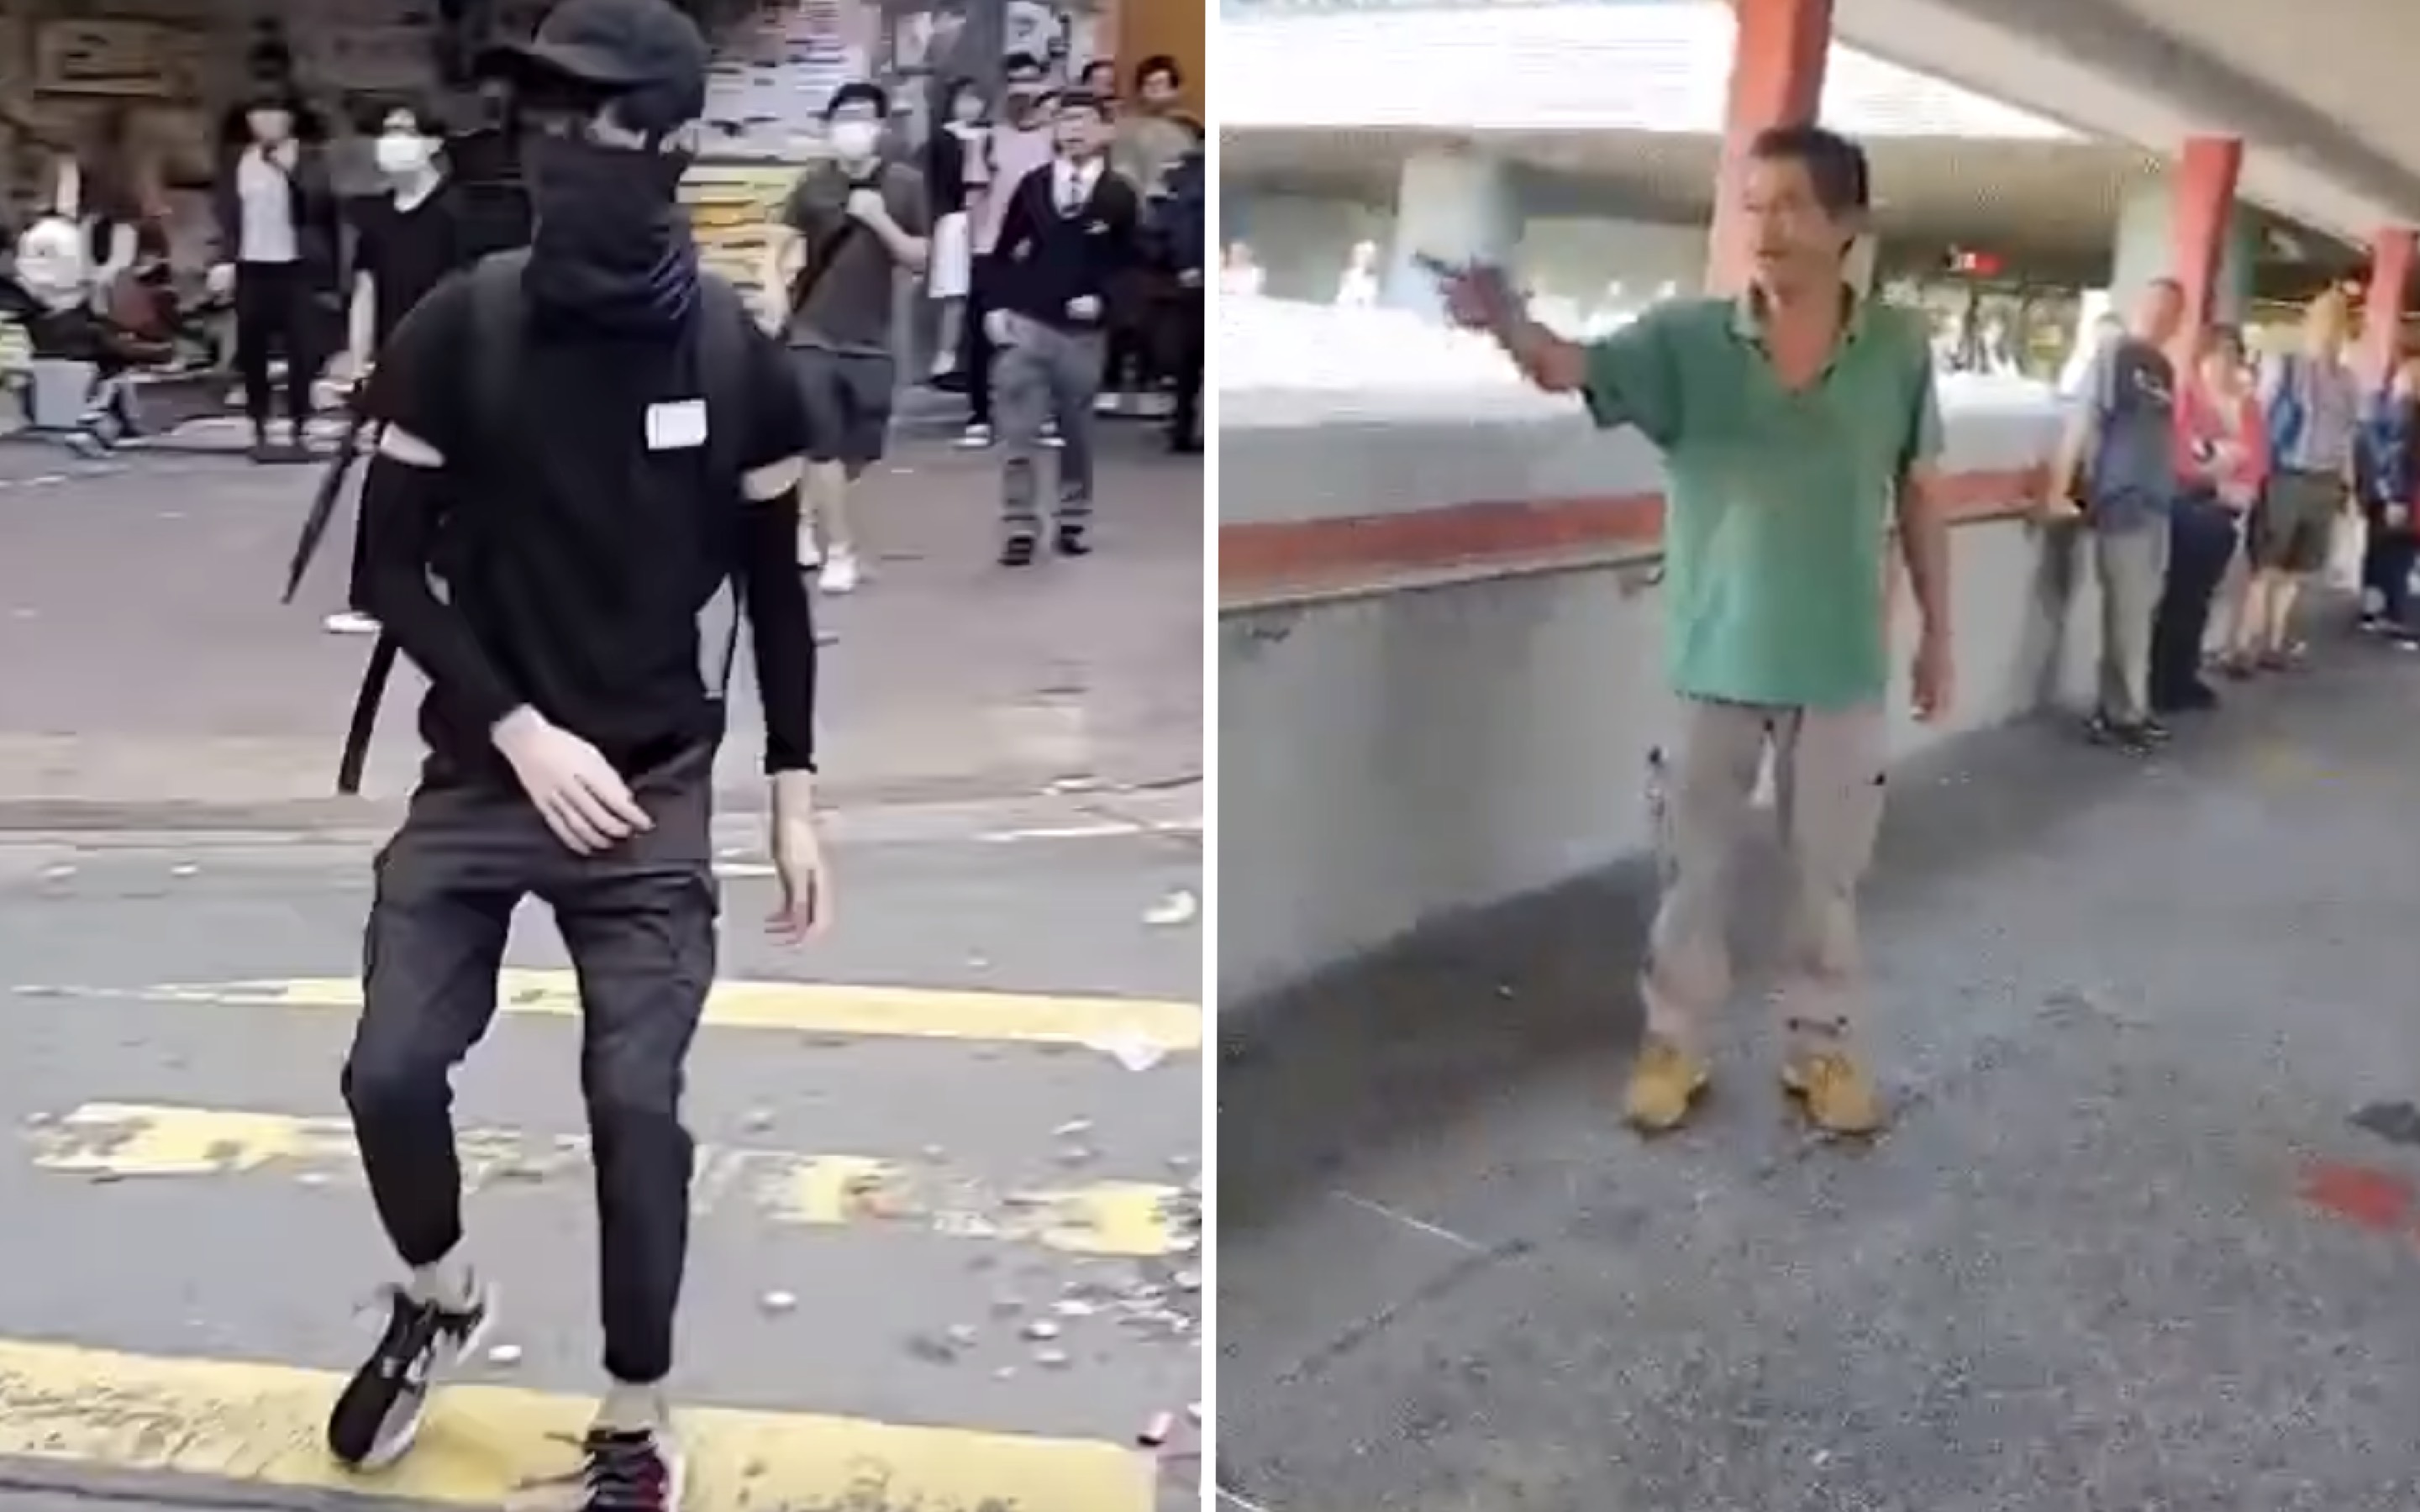 A 21-year-old man moments before he was shot by a police officer (right), and a 57-year-old man moments before he was doused with flammable liquid and set alight (left). Both were taken to hospital yesterday in a critical condition. Screengrabs via YouTube and Facebook video.